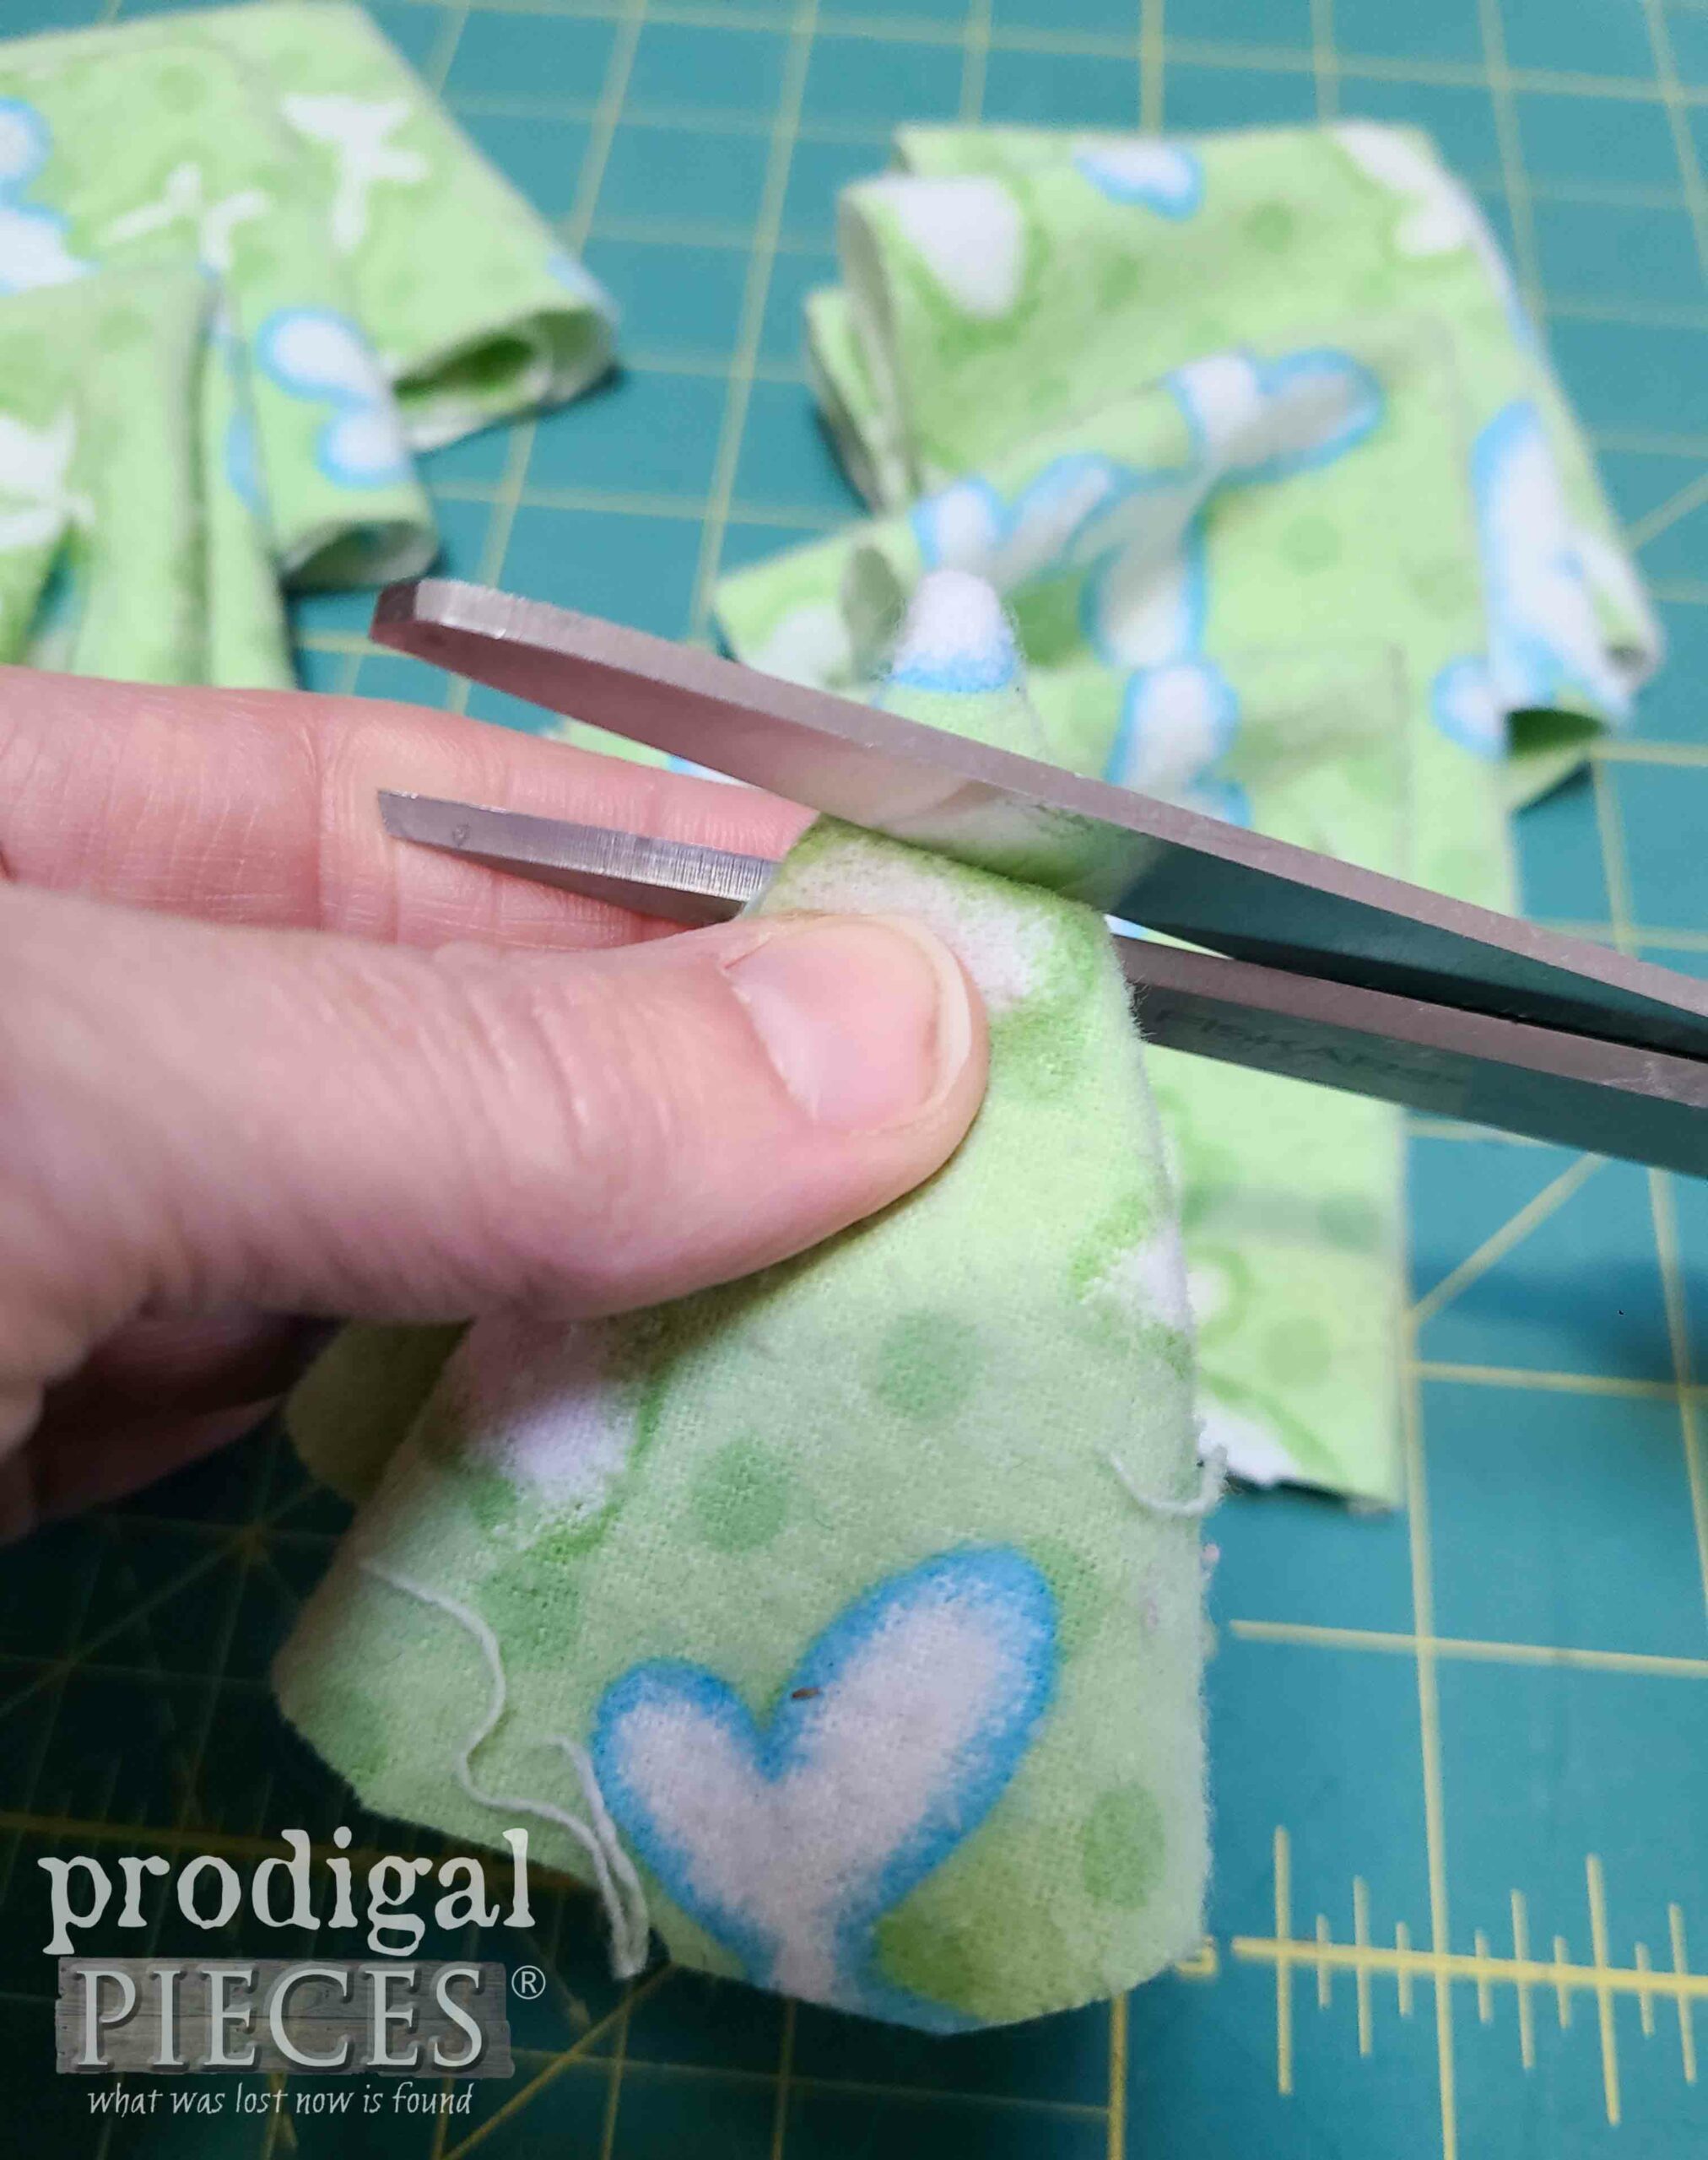 Snipping Hole in Flannel Fabric for DIY Dog Snuffle Board Toy | prodigalpieces.com #prodigalpieces